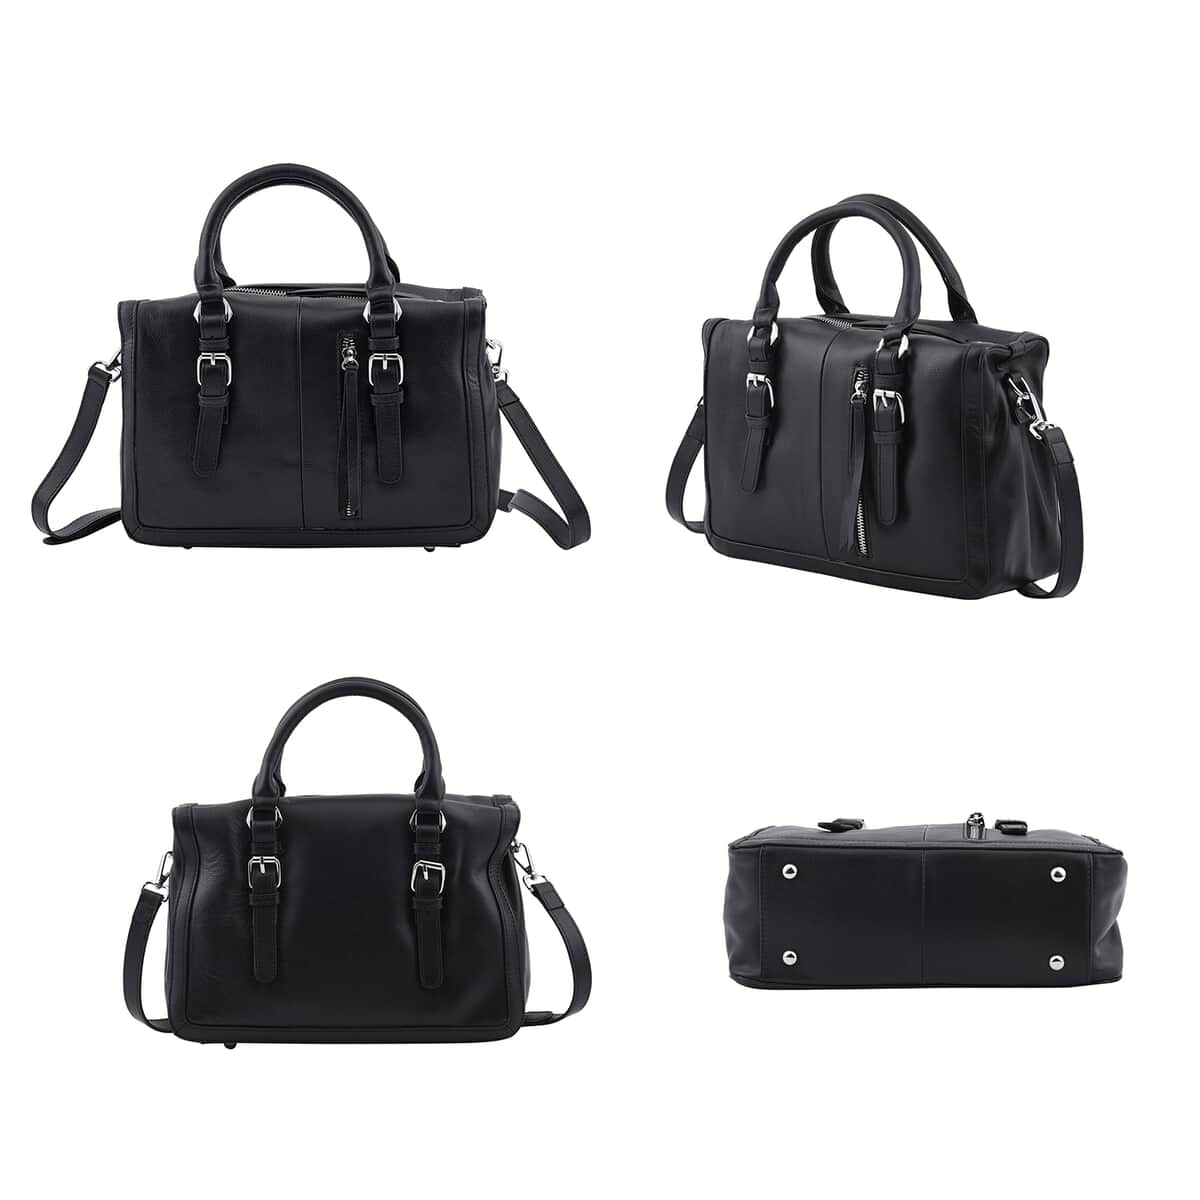 Black Genuine Leather Tote Bag with Top Double Handles and Shoulder Strap image number 3